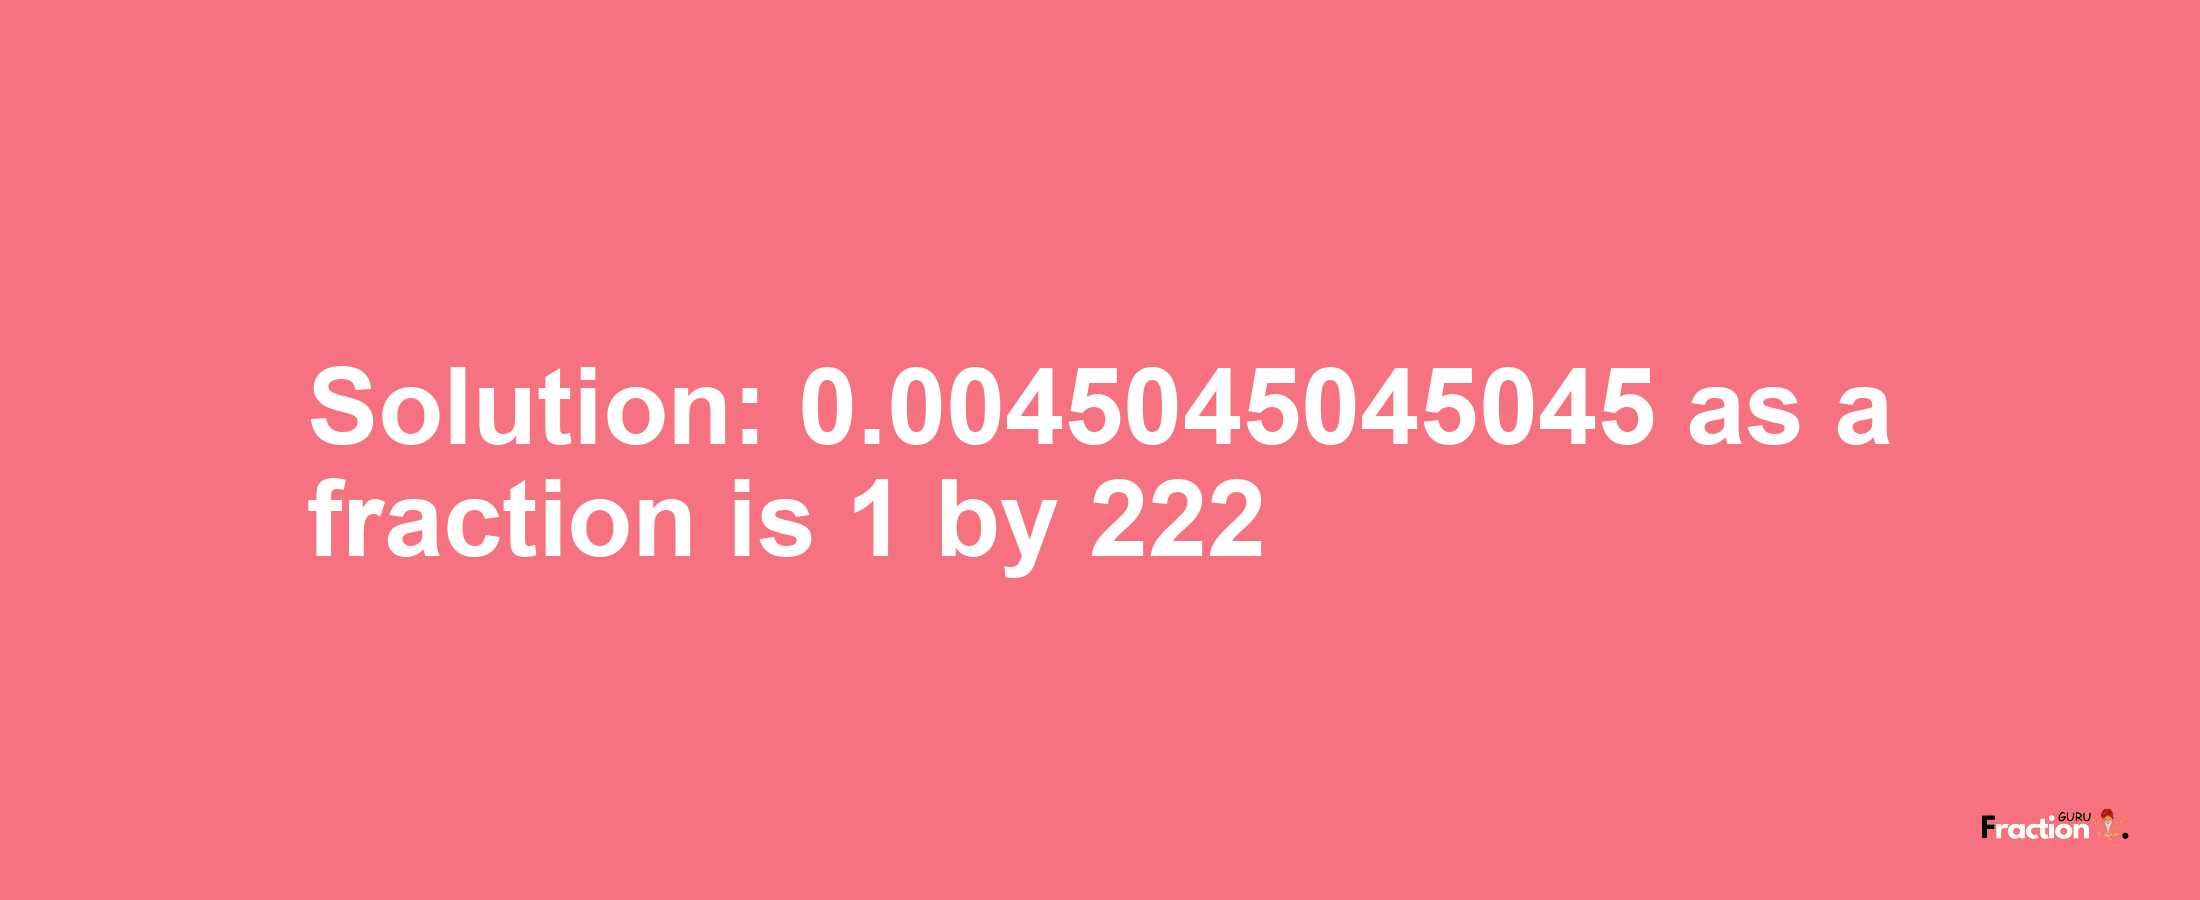 Solution:0.0045045045045 as a fraction is 1/222